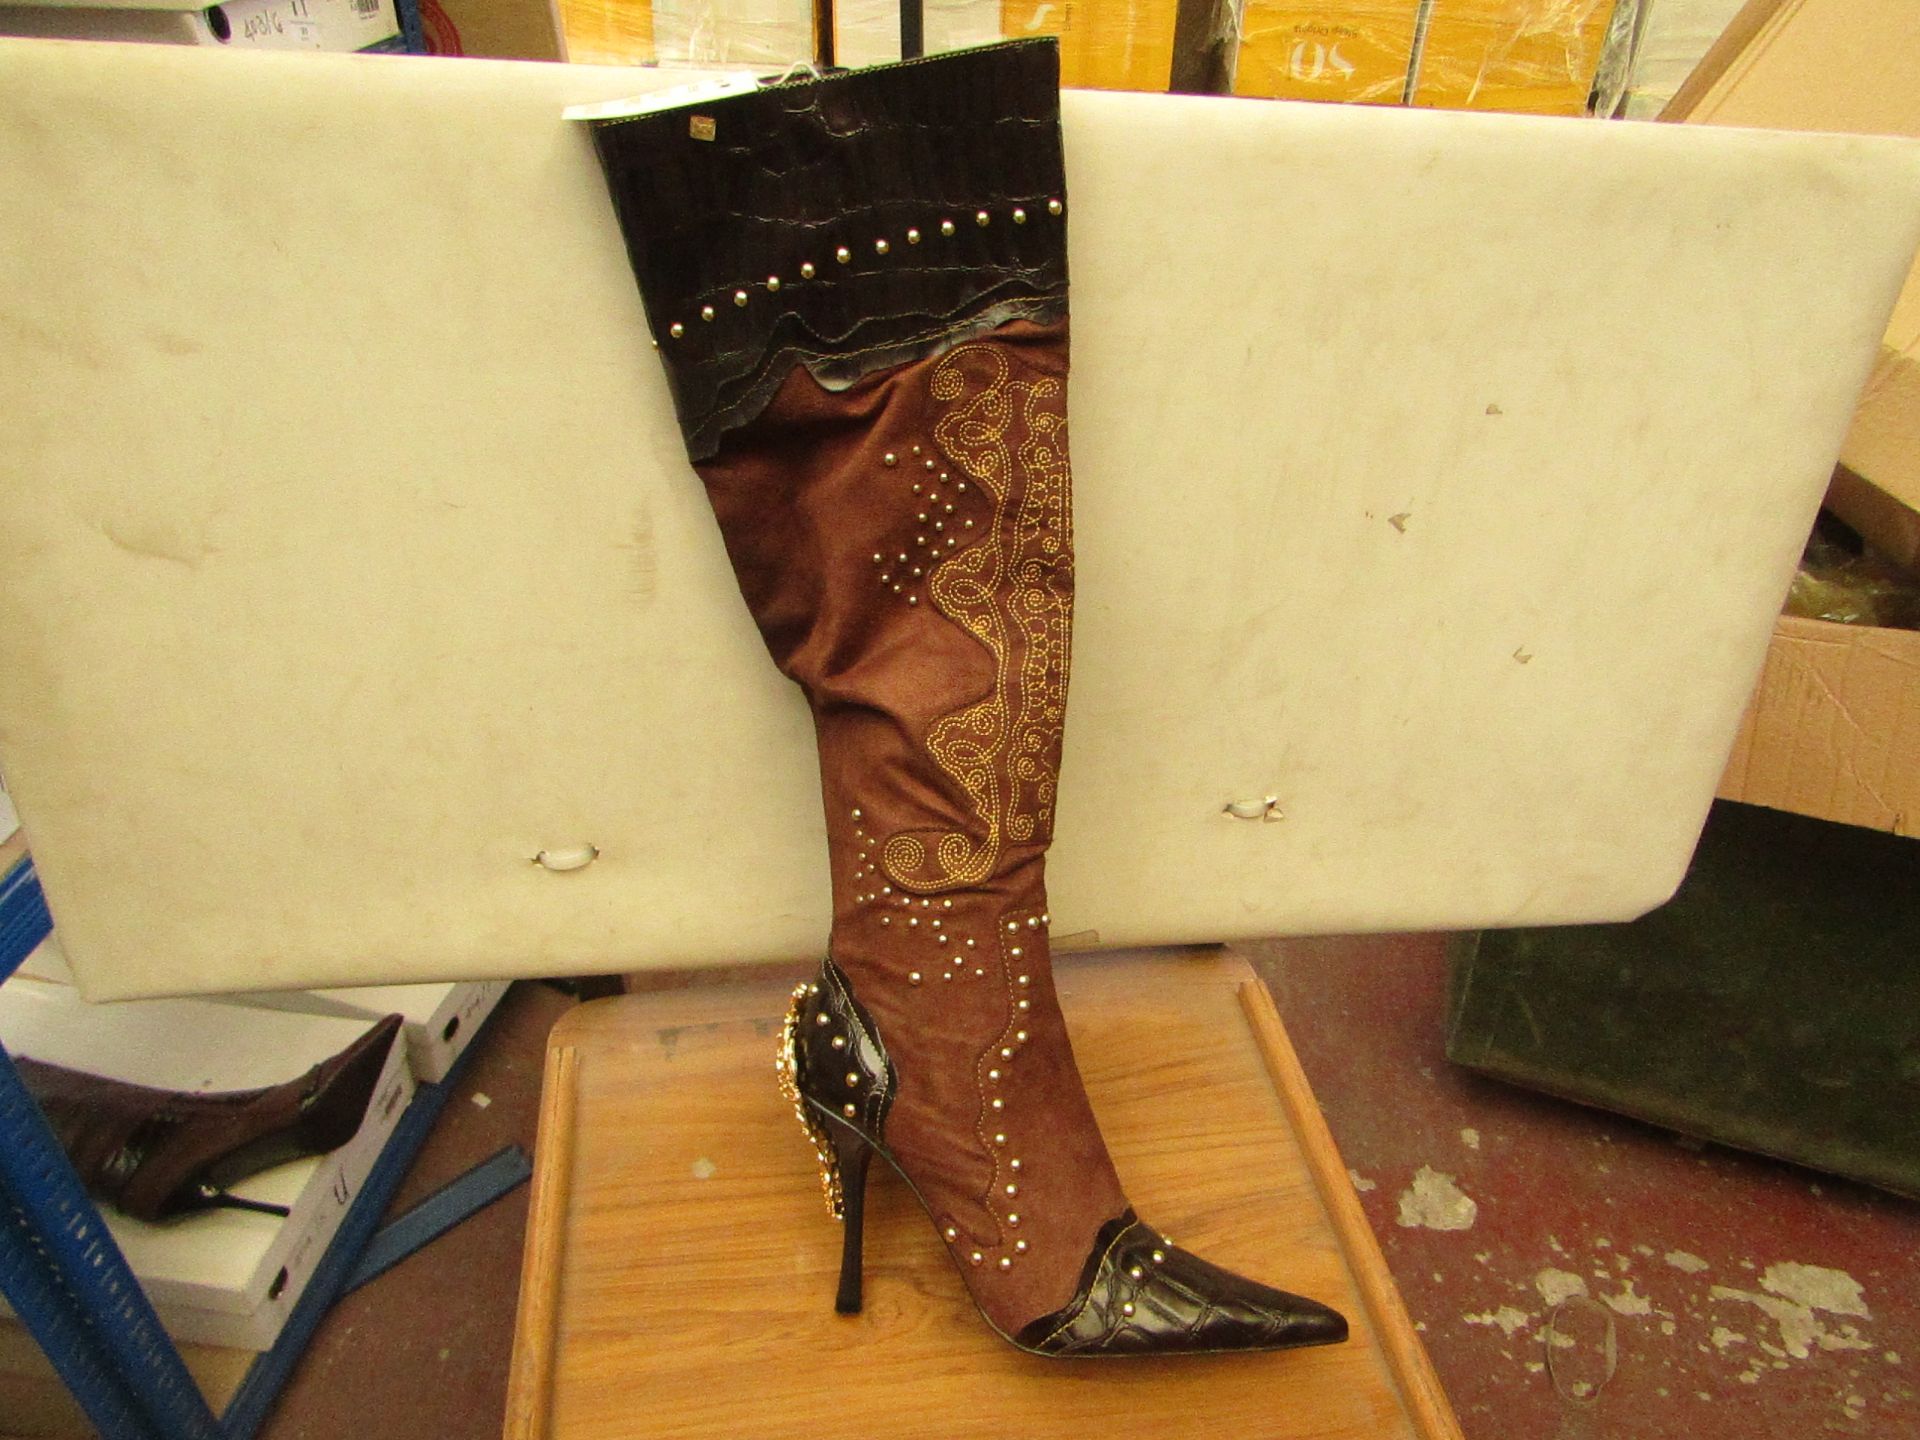 1 x Pair of Unze By Shalimar Boots. Size 4.New & Boxed. See Image For Design